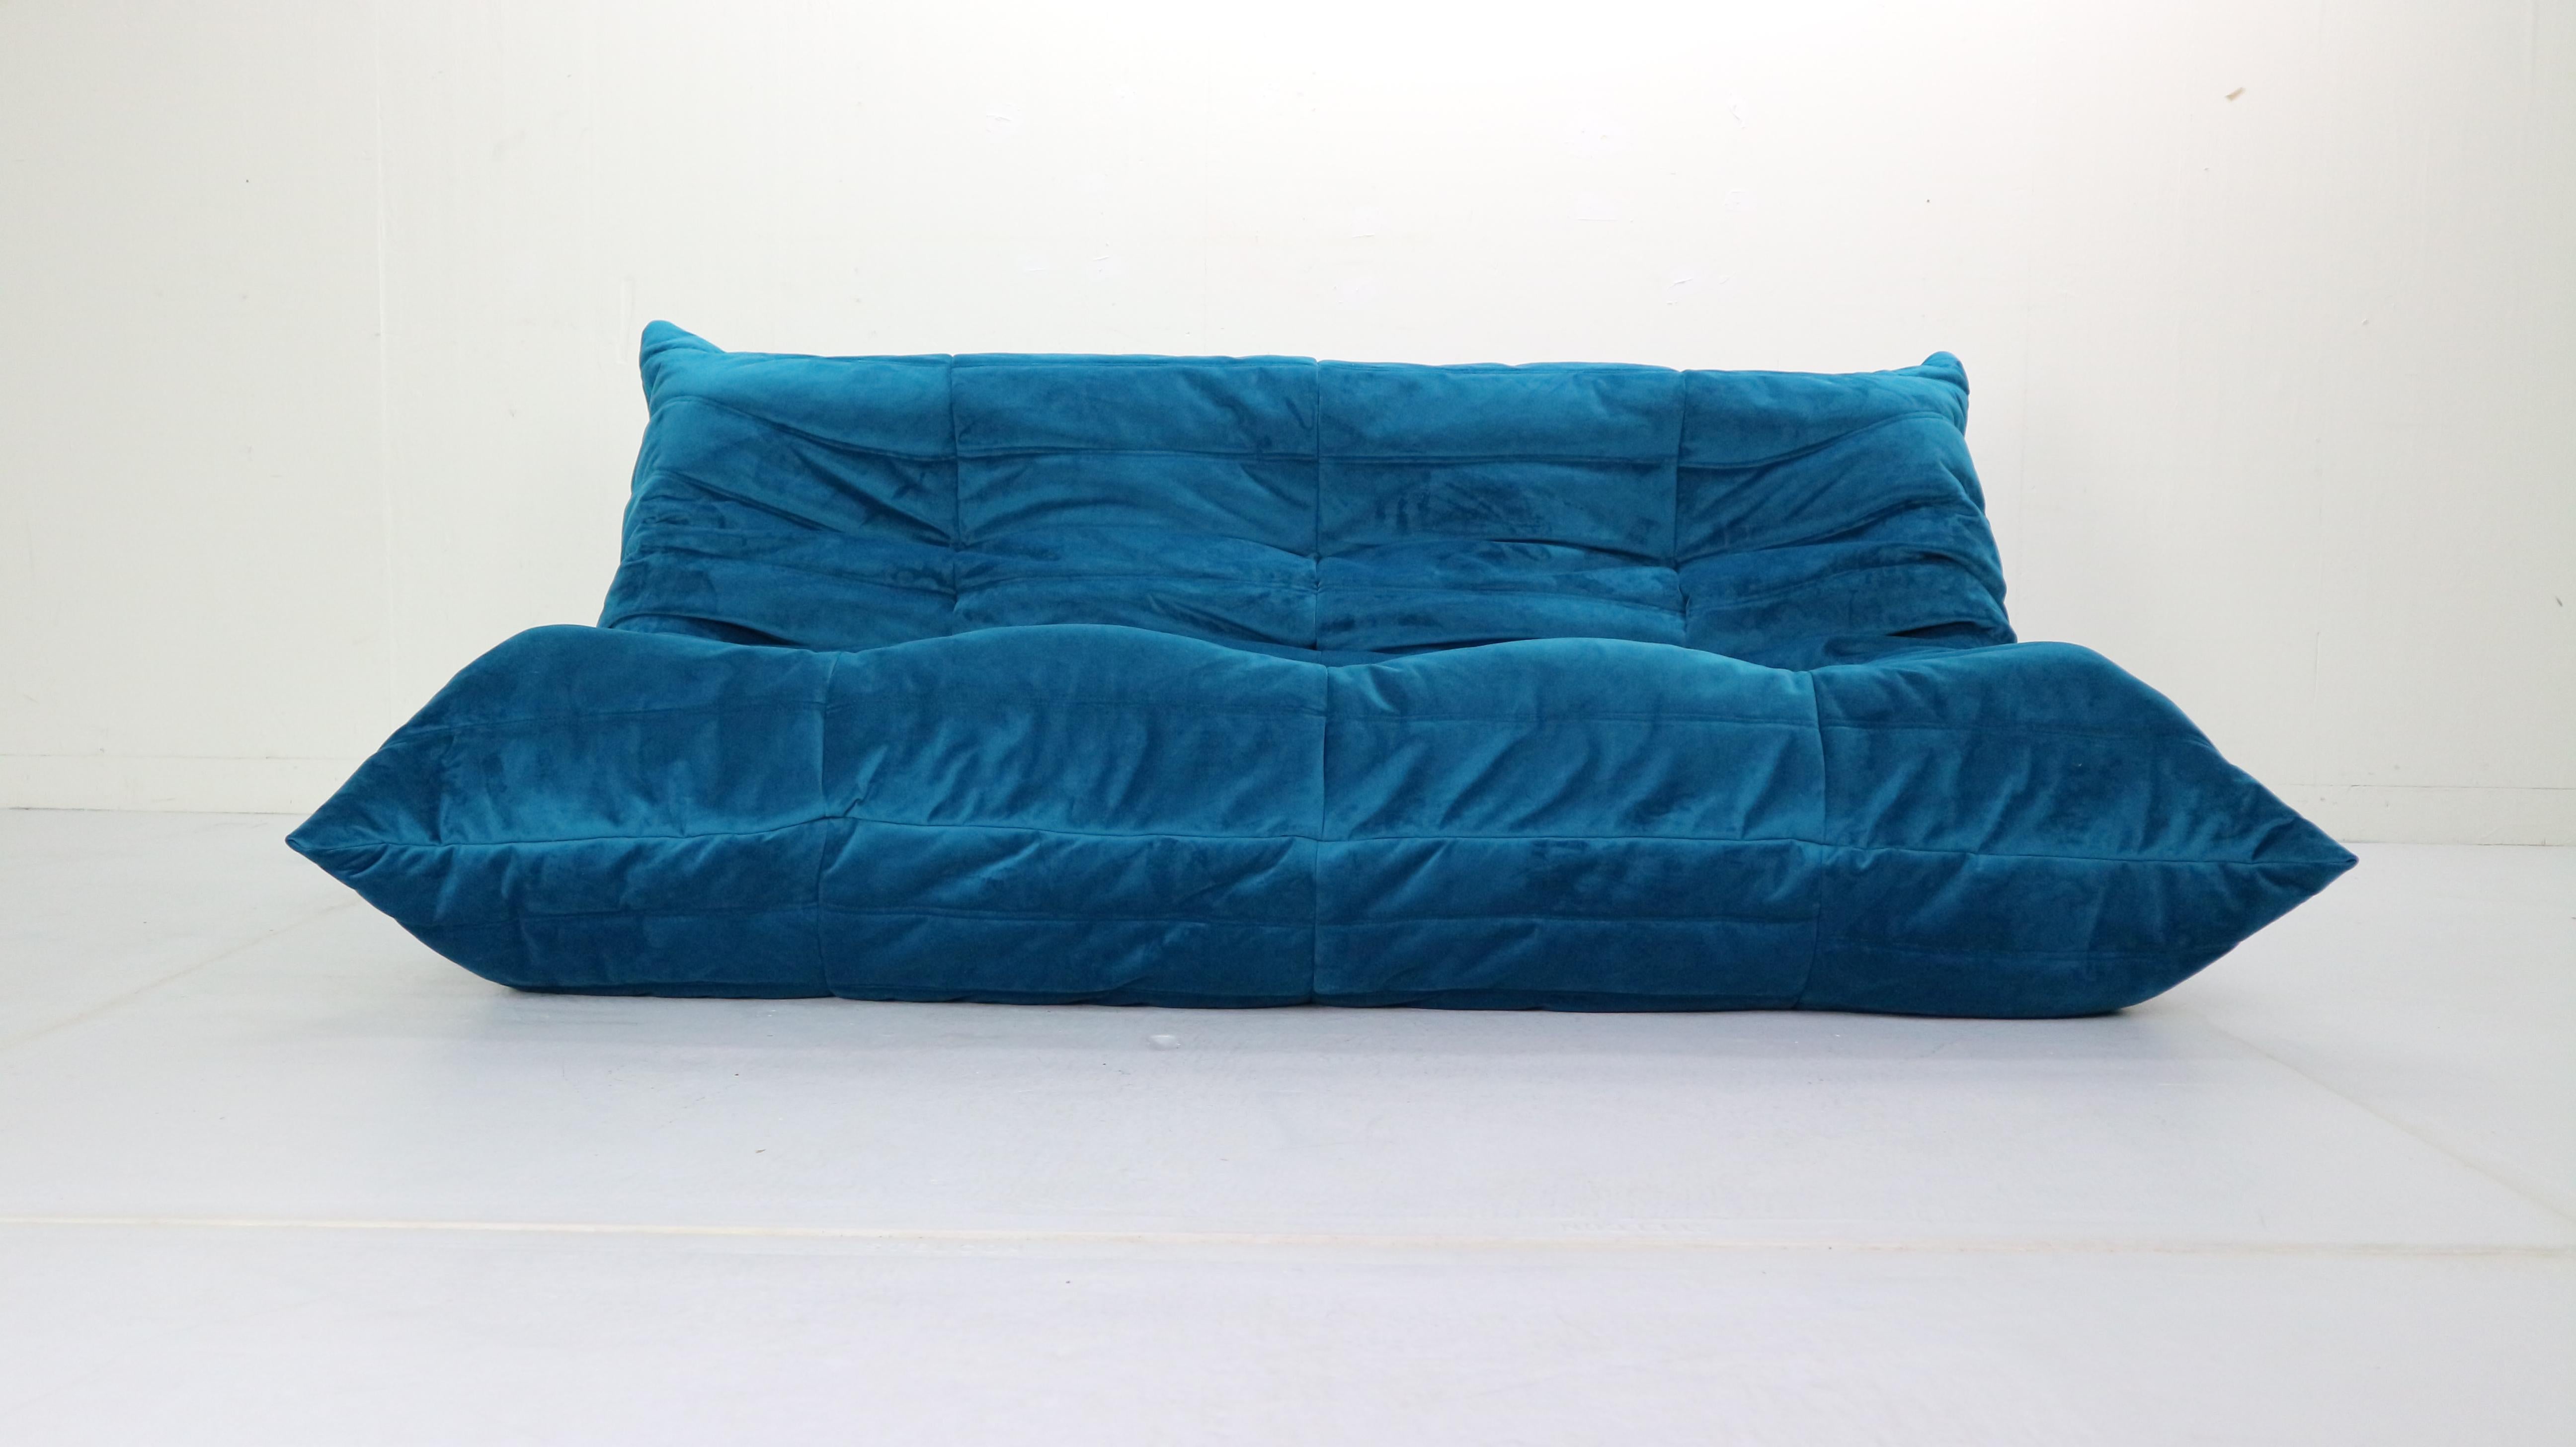 Magnificent Togo three-seat sofa designed by Michel Ducaroy in 1973 and was manufactured by Ligne Roset in France.
Very comfortable and beautiful accent to your living room space.
It has been reupholstered in a blue soft velvet fabric.

   
 